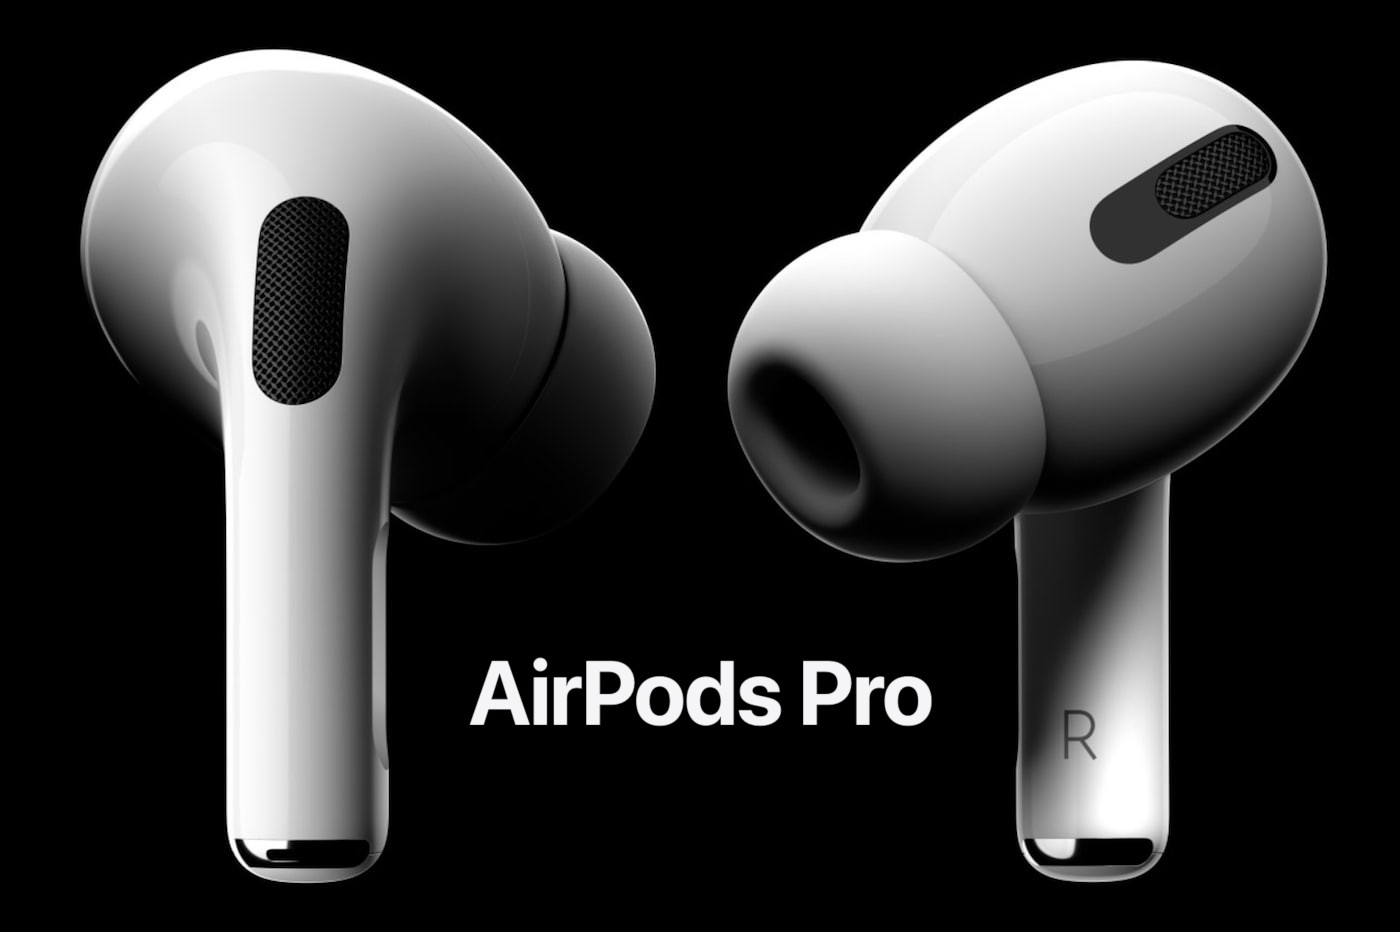 Apple upgraded its AirPods Pro TWS headphones to support MagSafe charging